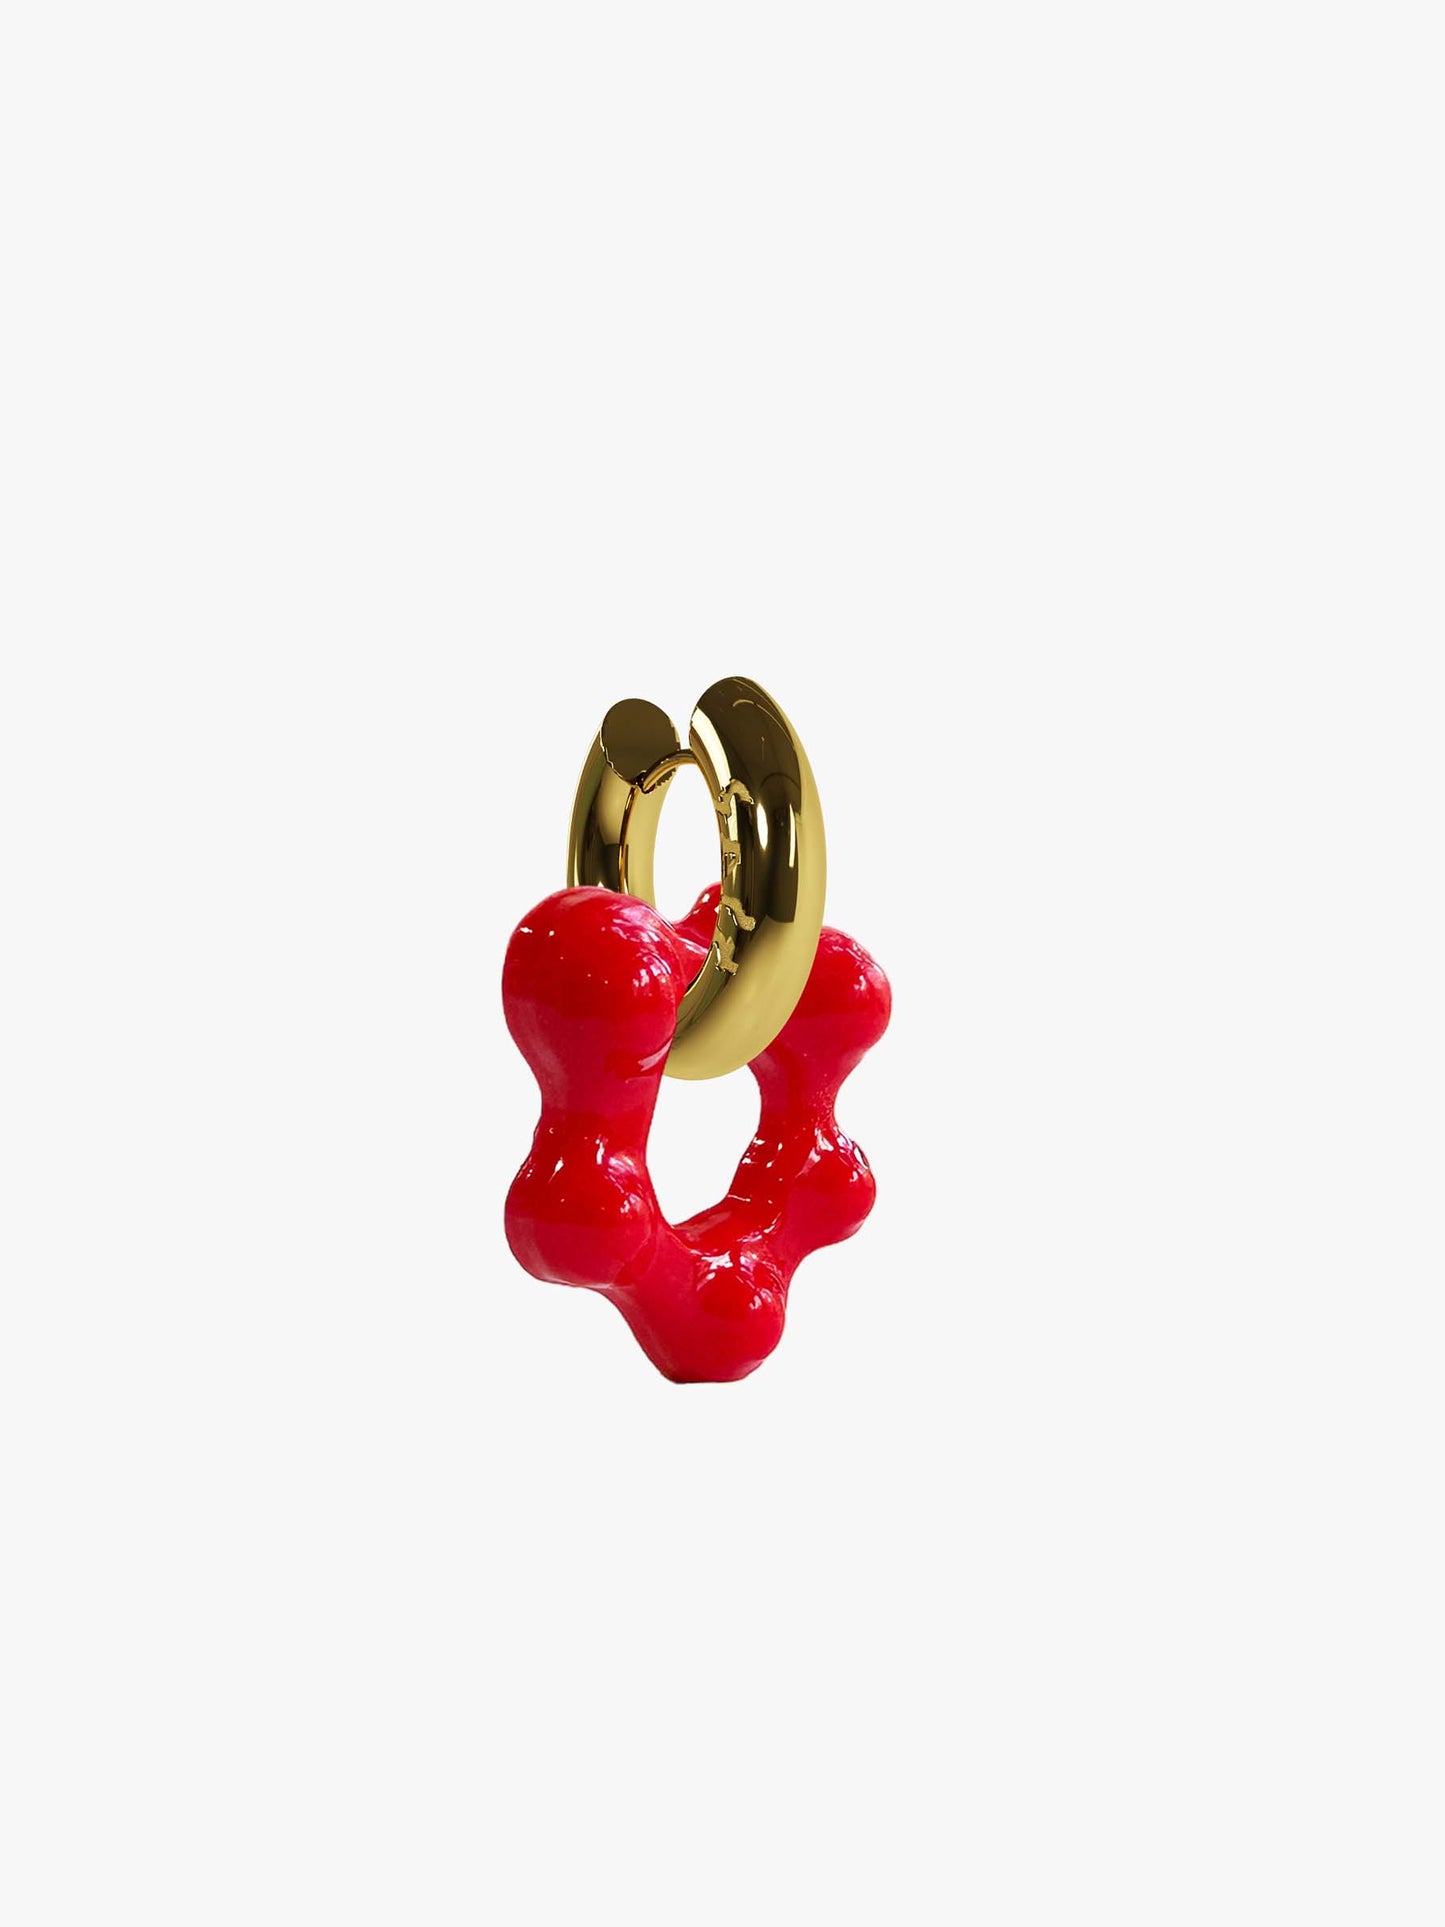 Oyo red gold earring (pair)